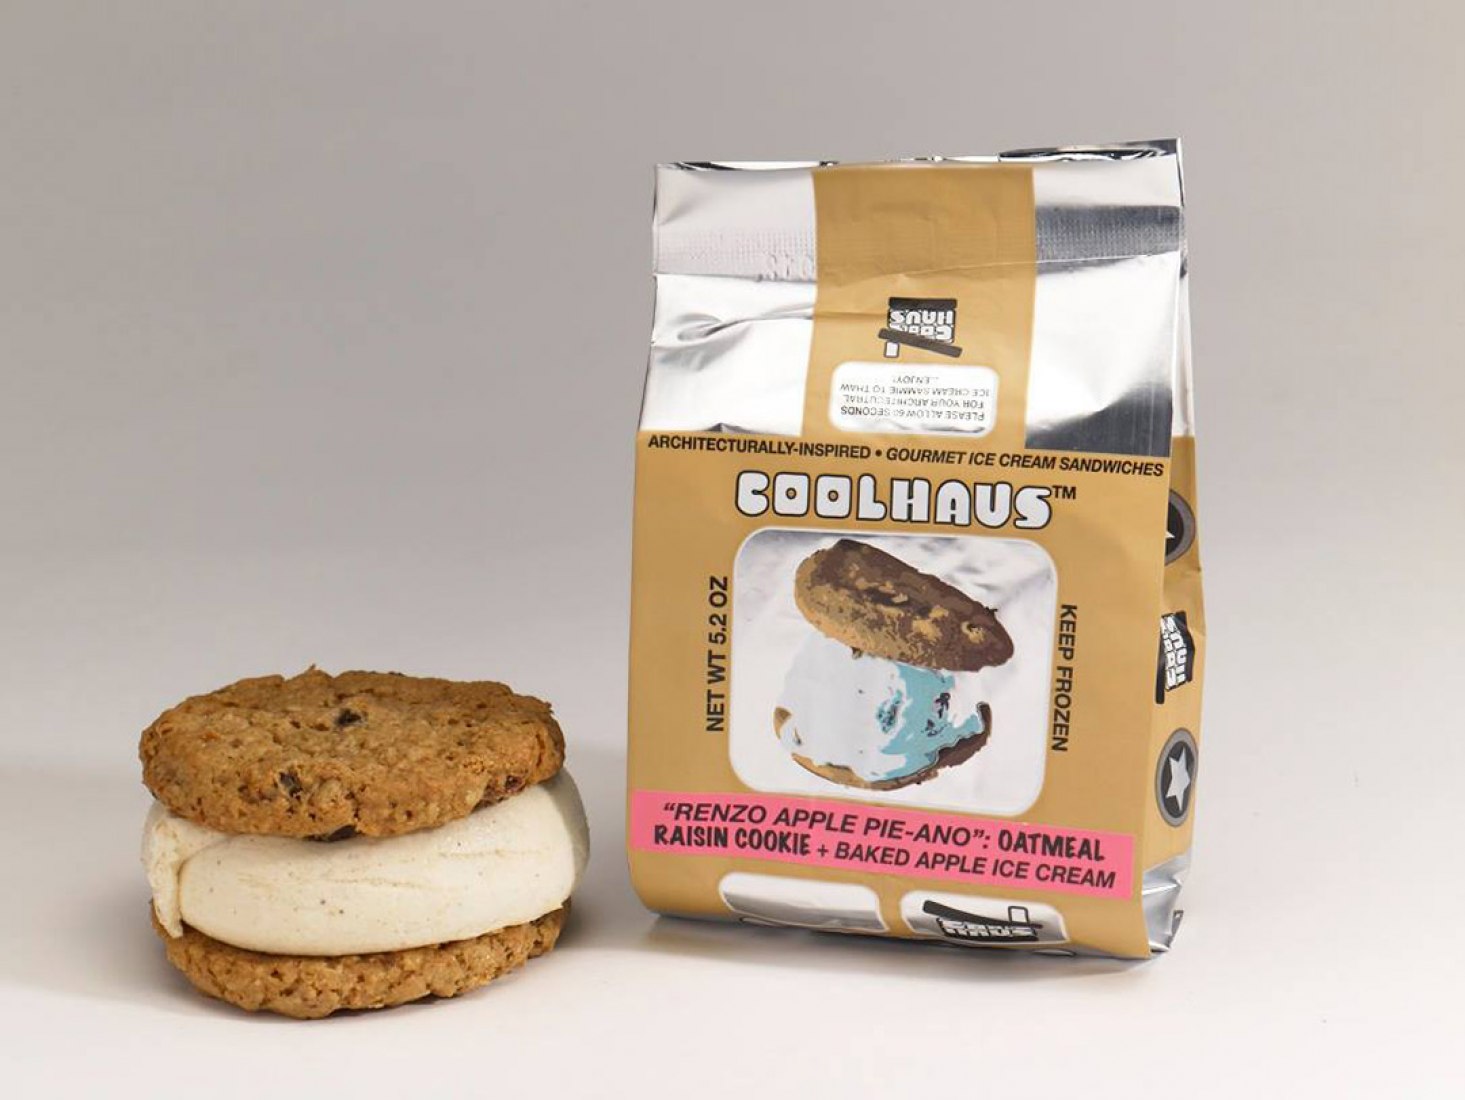 Coolhaus. Photography courtesy of Coolhaus.